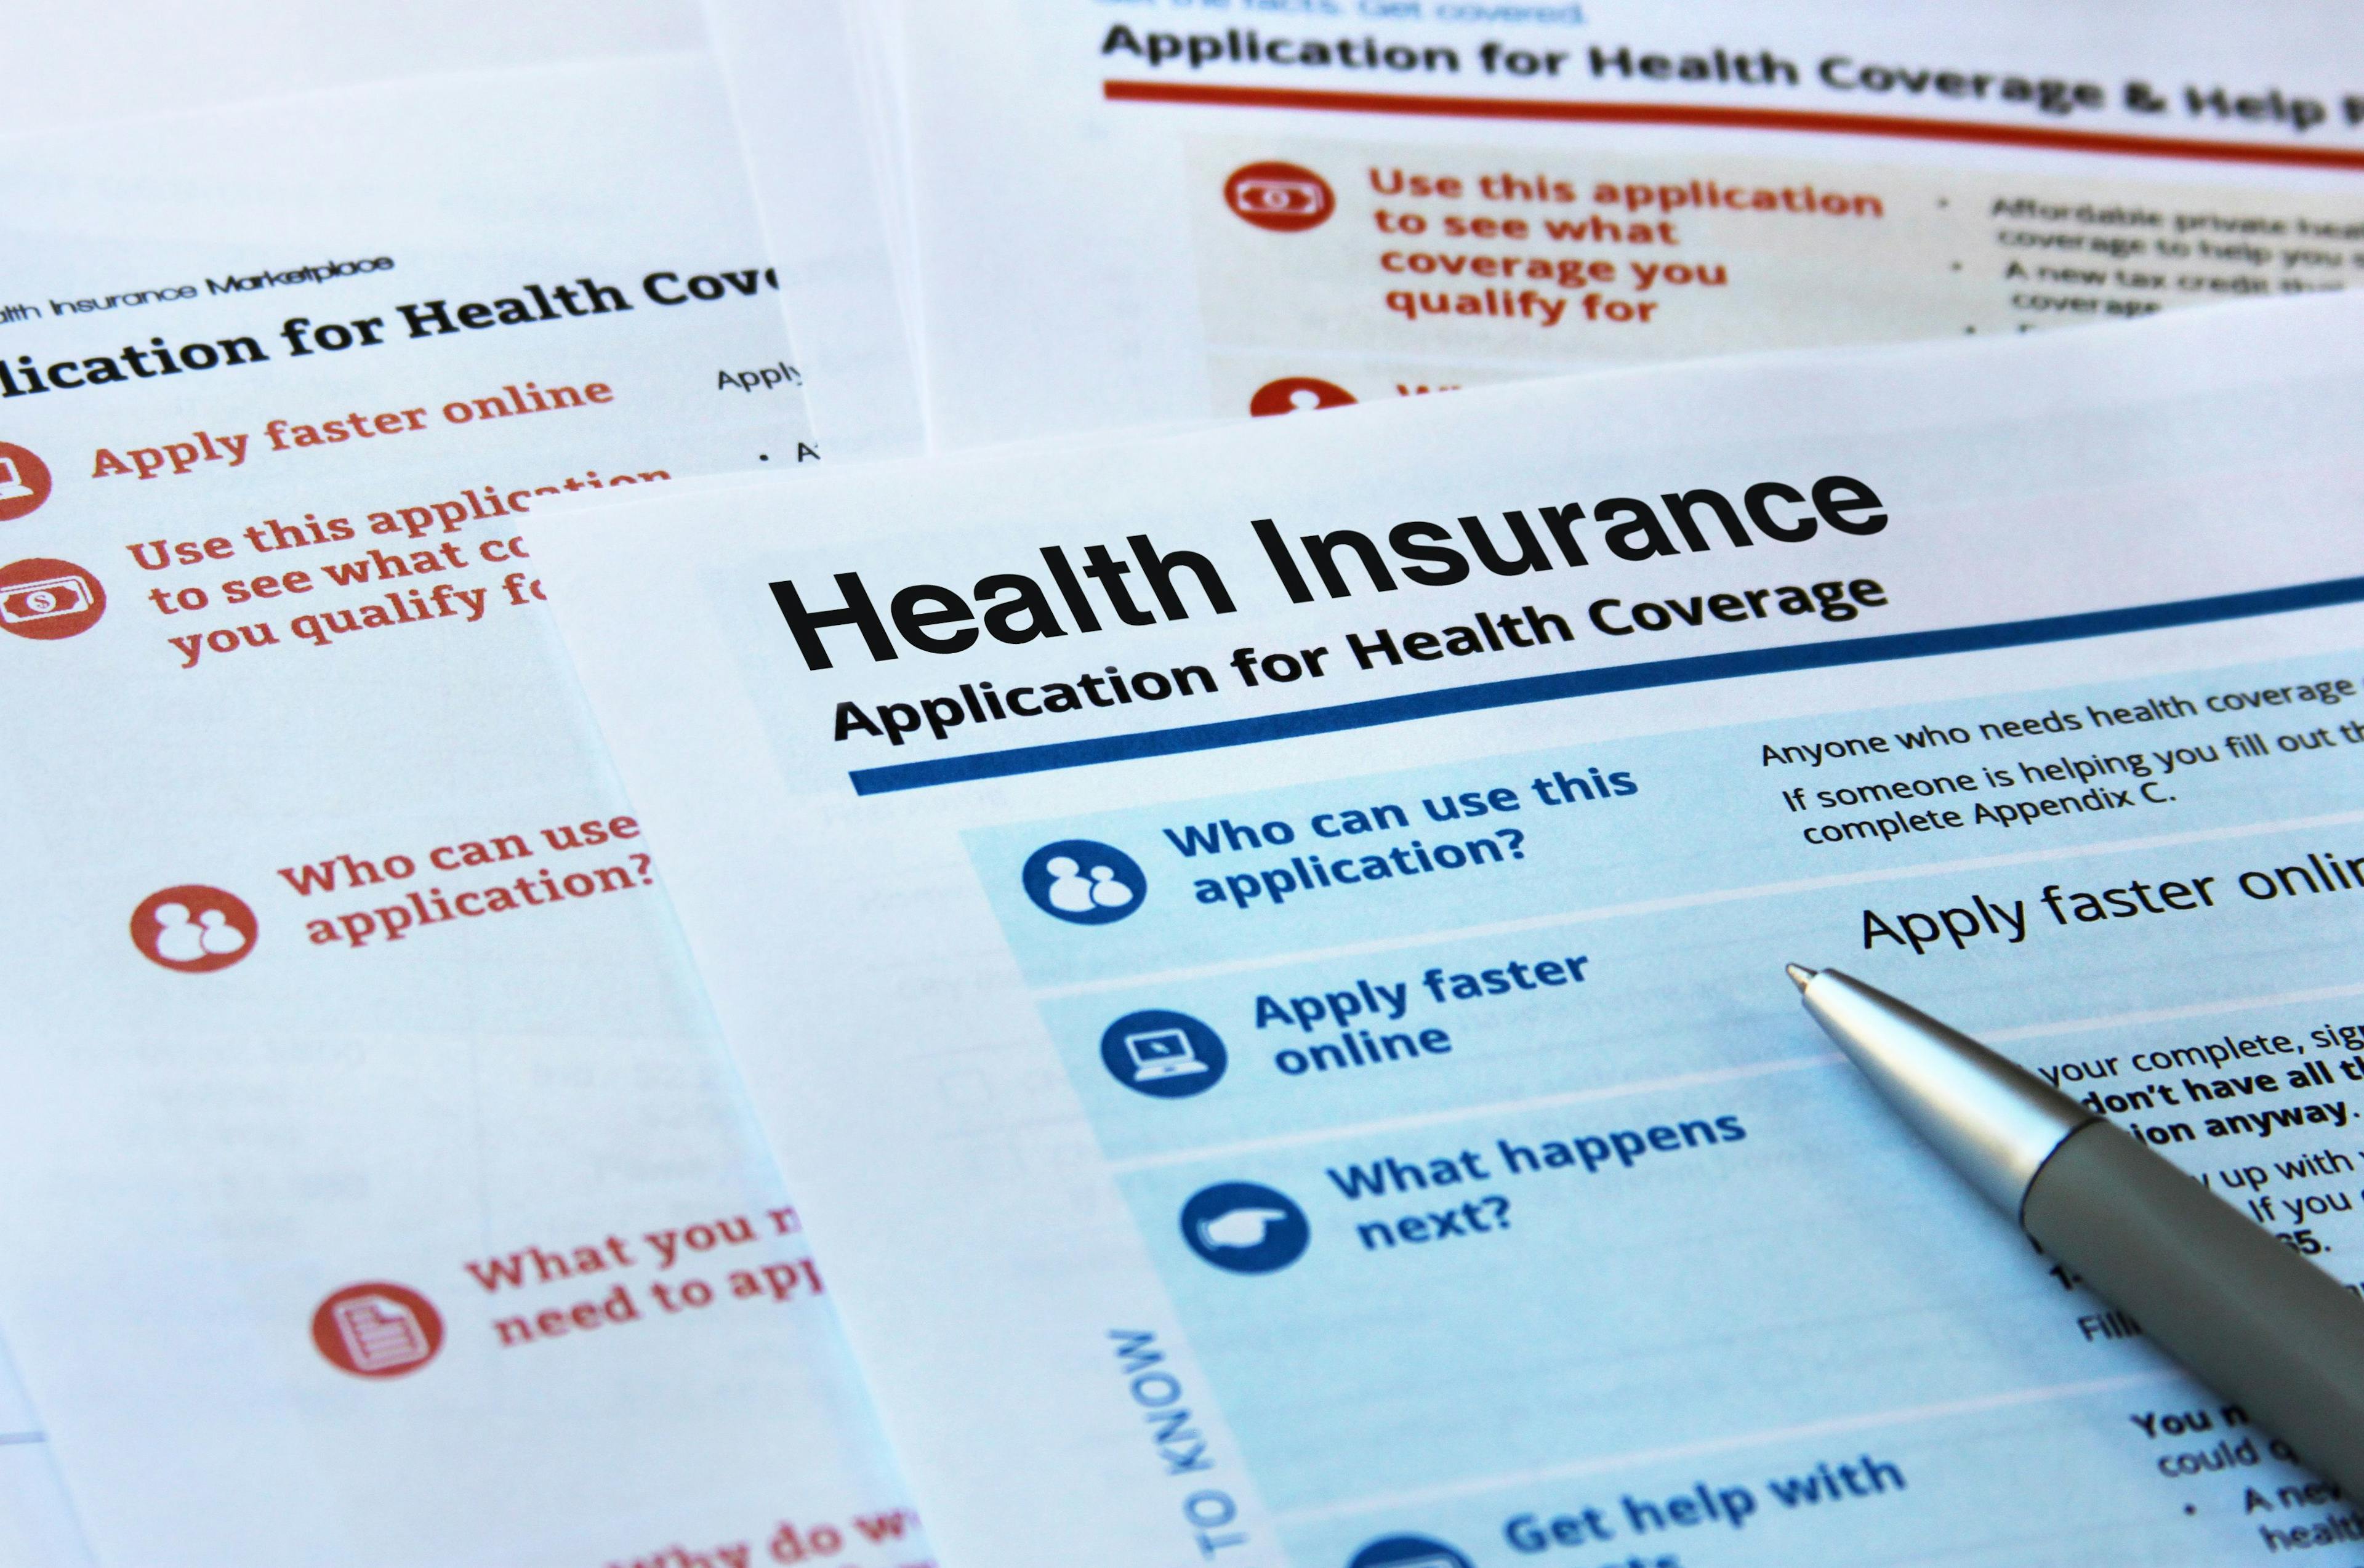 Application for health coverage | Image credit: Annap - stock.adobe.com